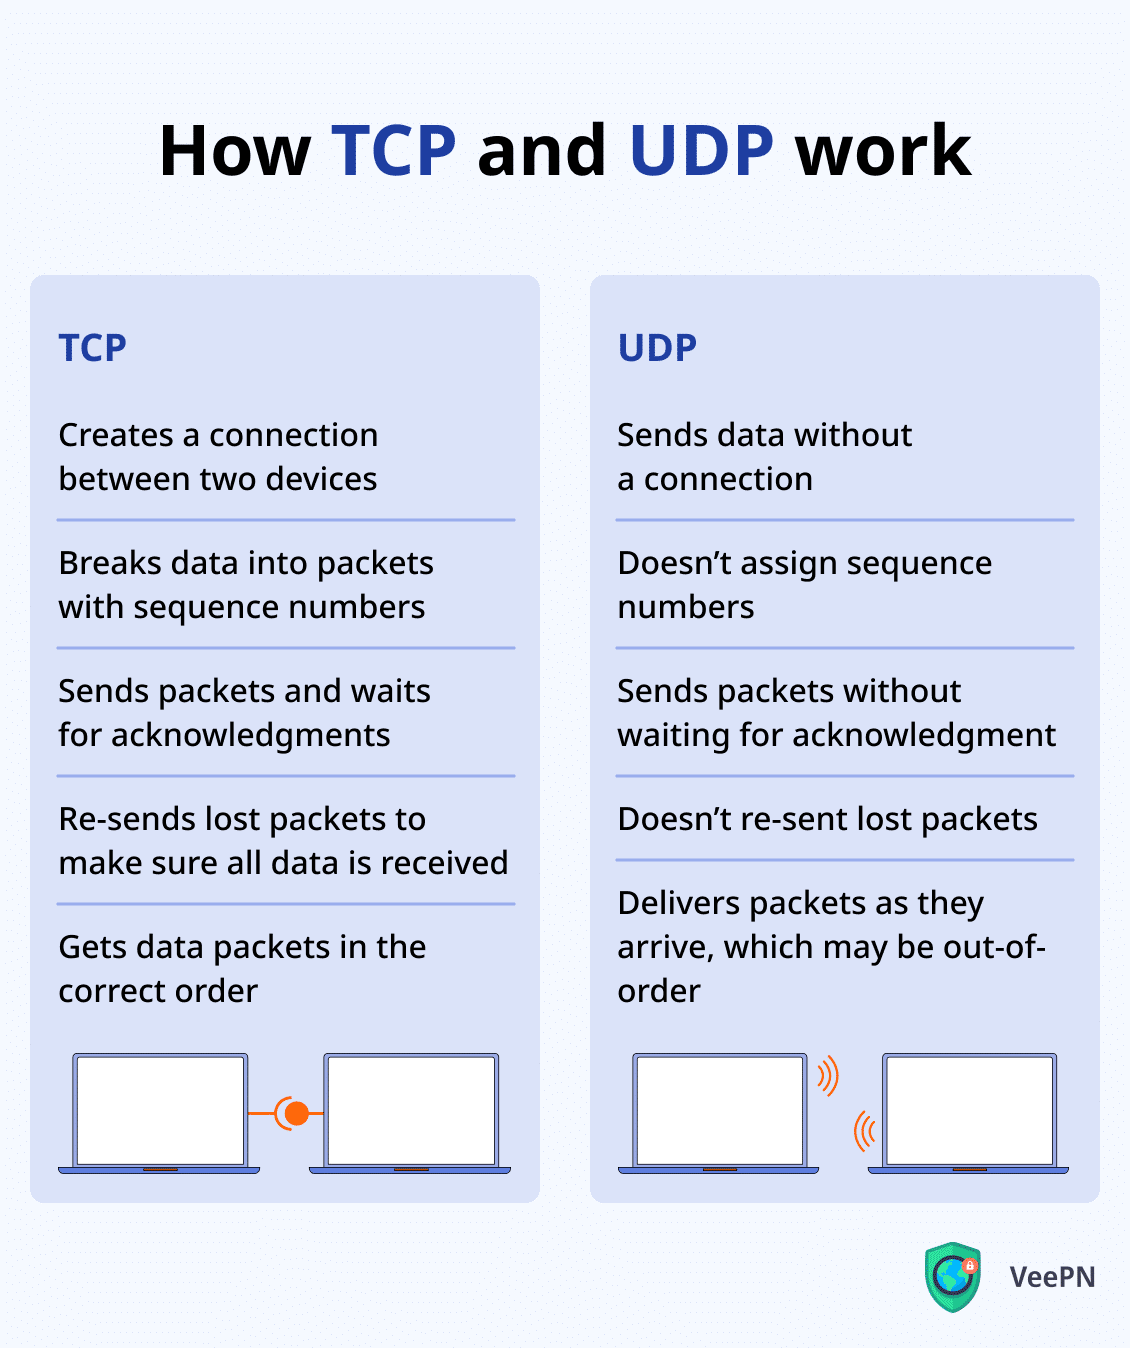 How TCP and UDP work